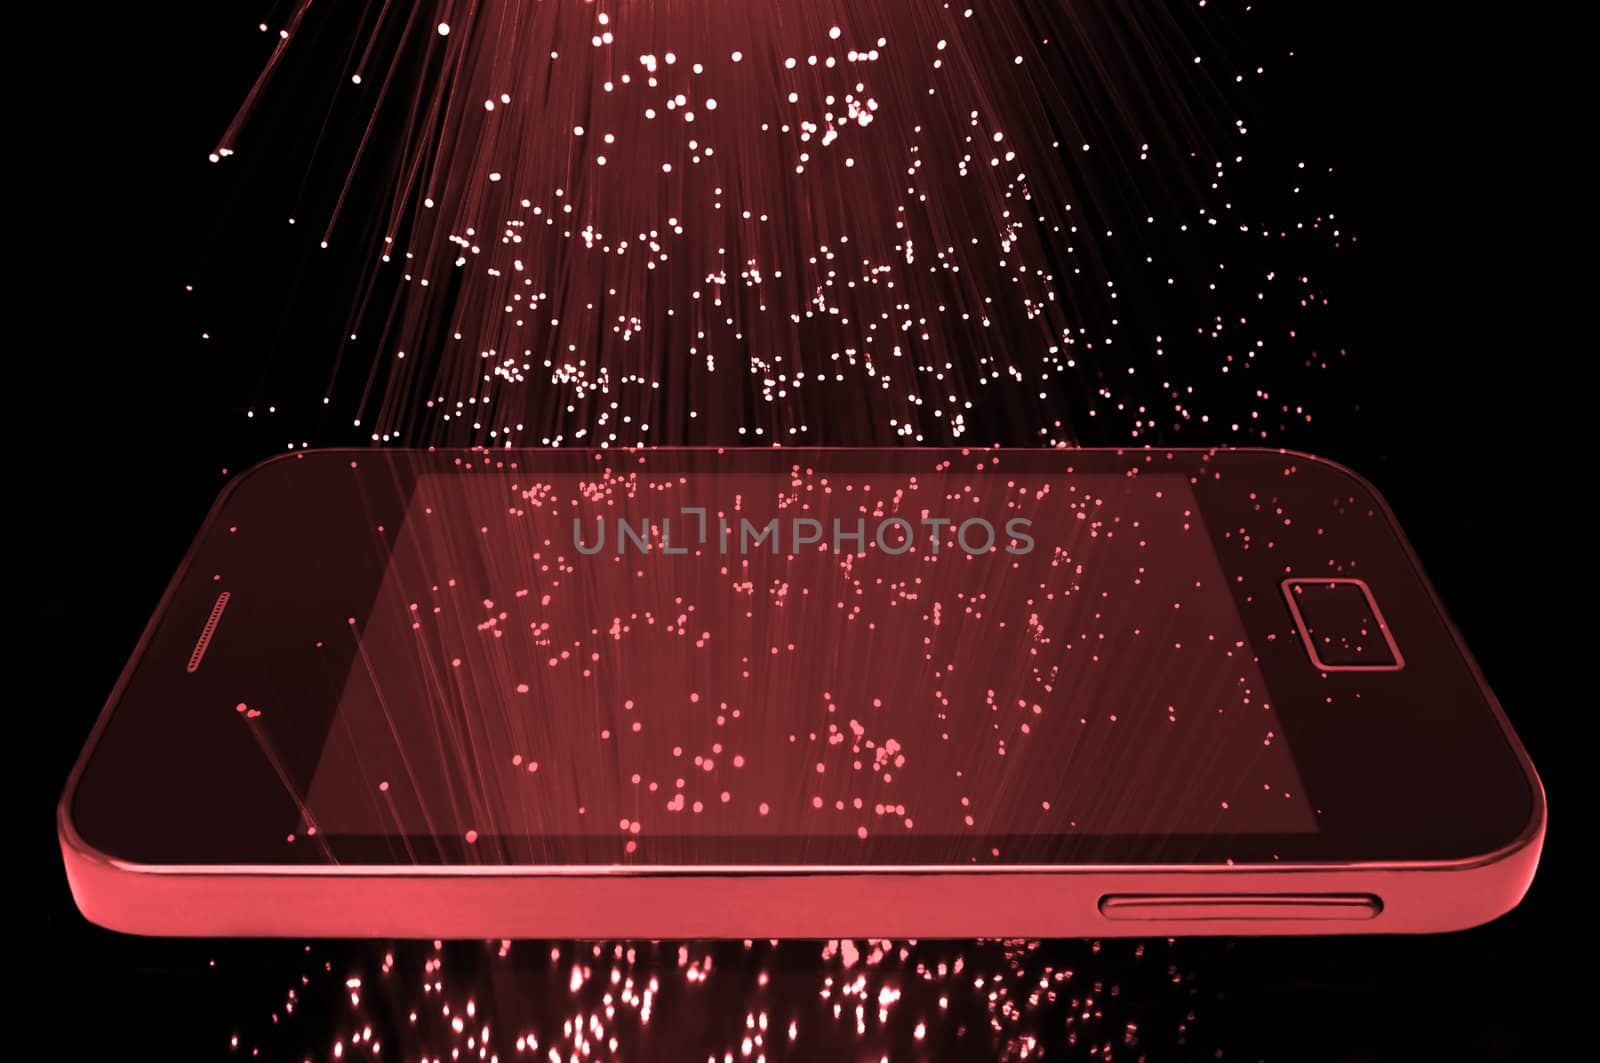 Many illuminated red fiber optic light strands cascading down against a black background and reflecting on the screen of a smart phone in the foreground